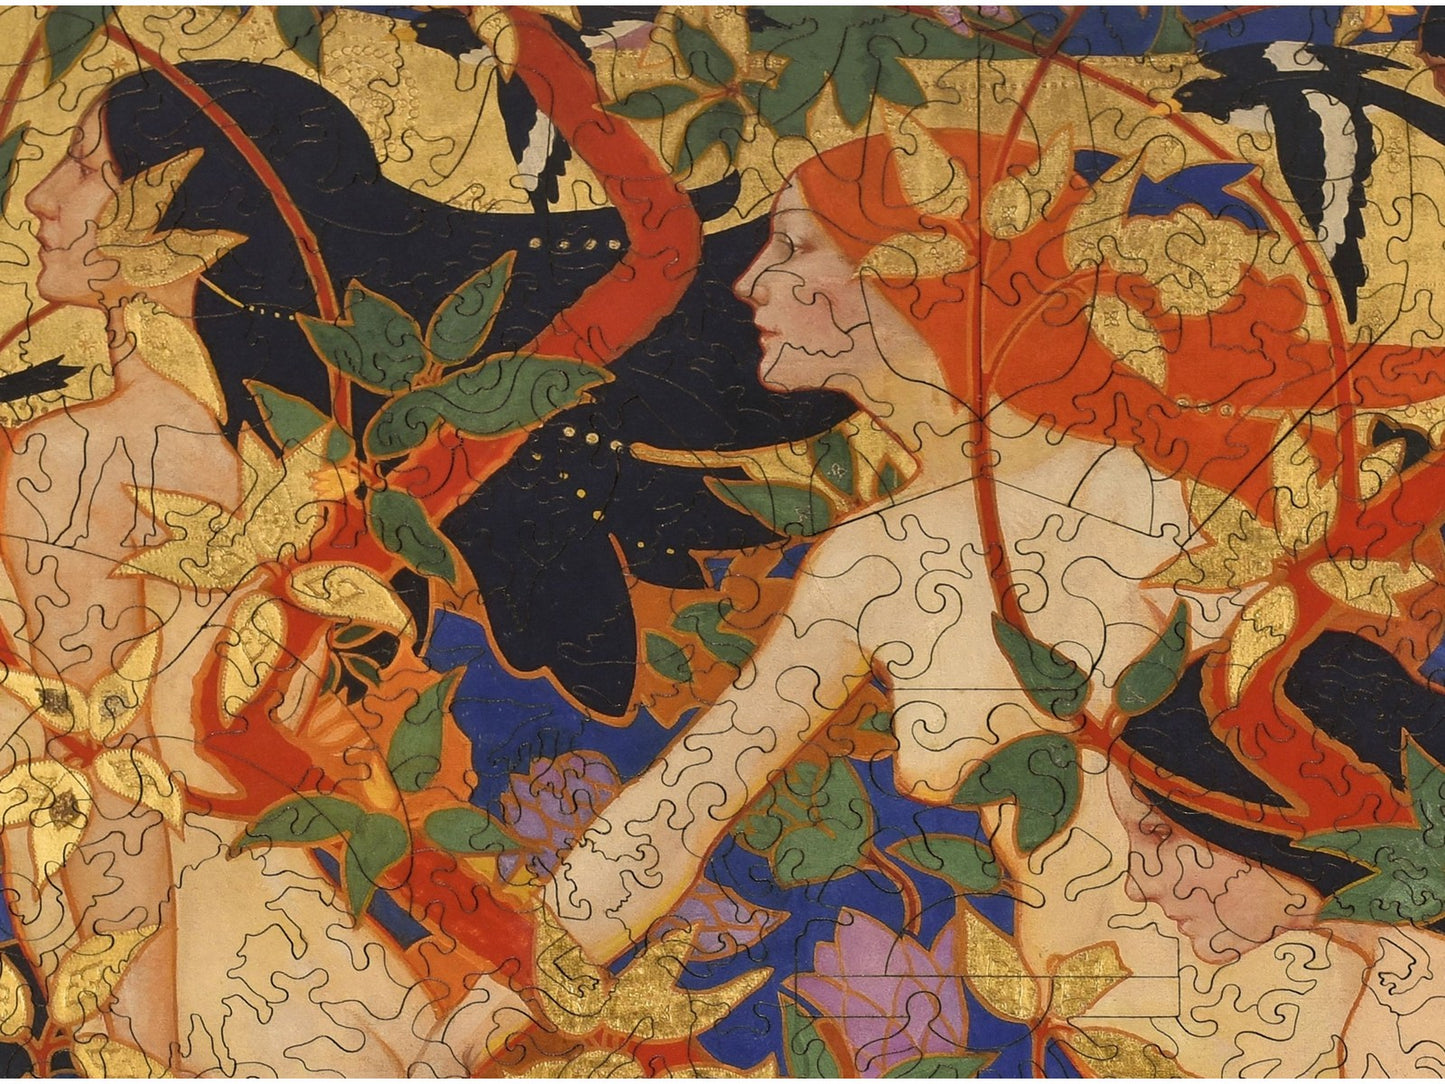 A closeup of the front of the puzzle, The Hunt (Diana and Her Nymphs), showing the detail in the pieces.